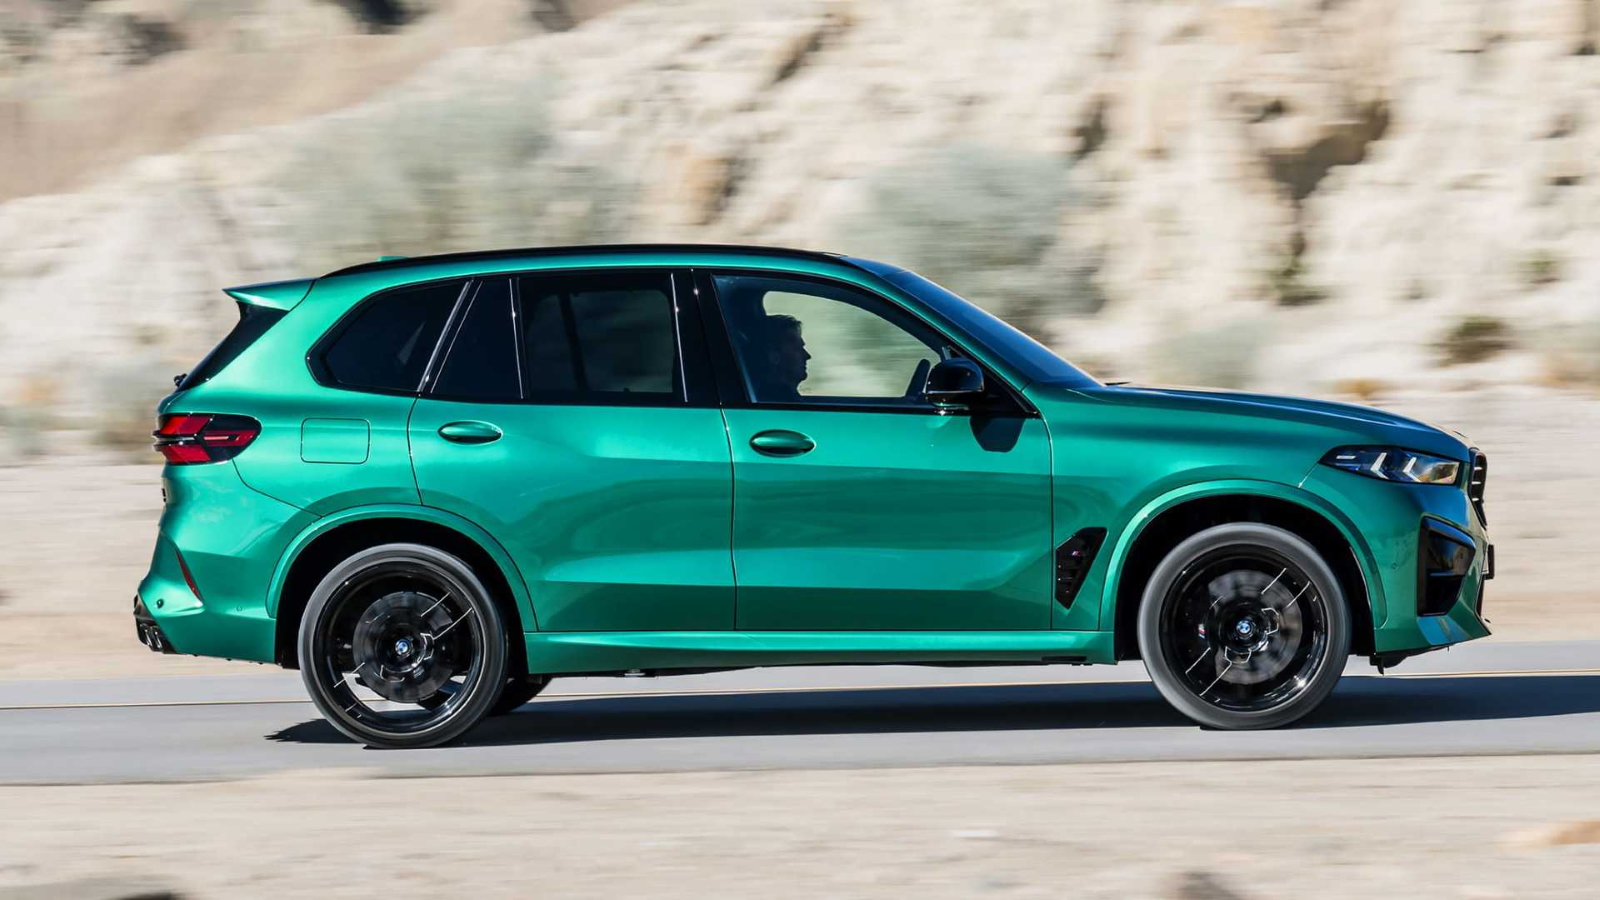 The Bmw X5 M And X6 Petition Are Fast Ugly Future